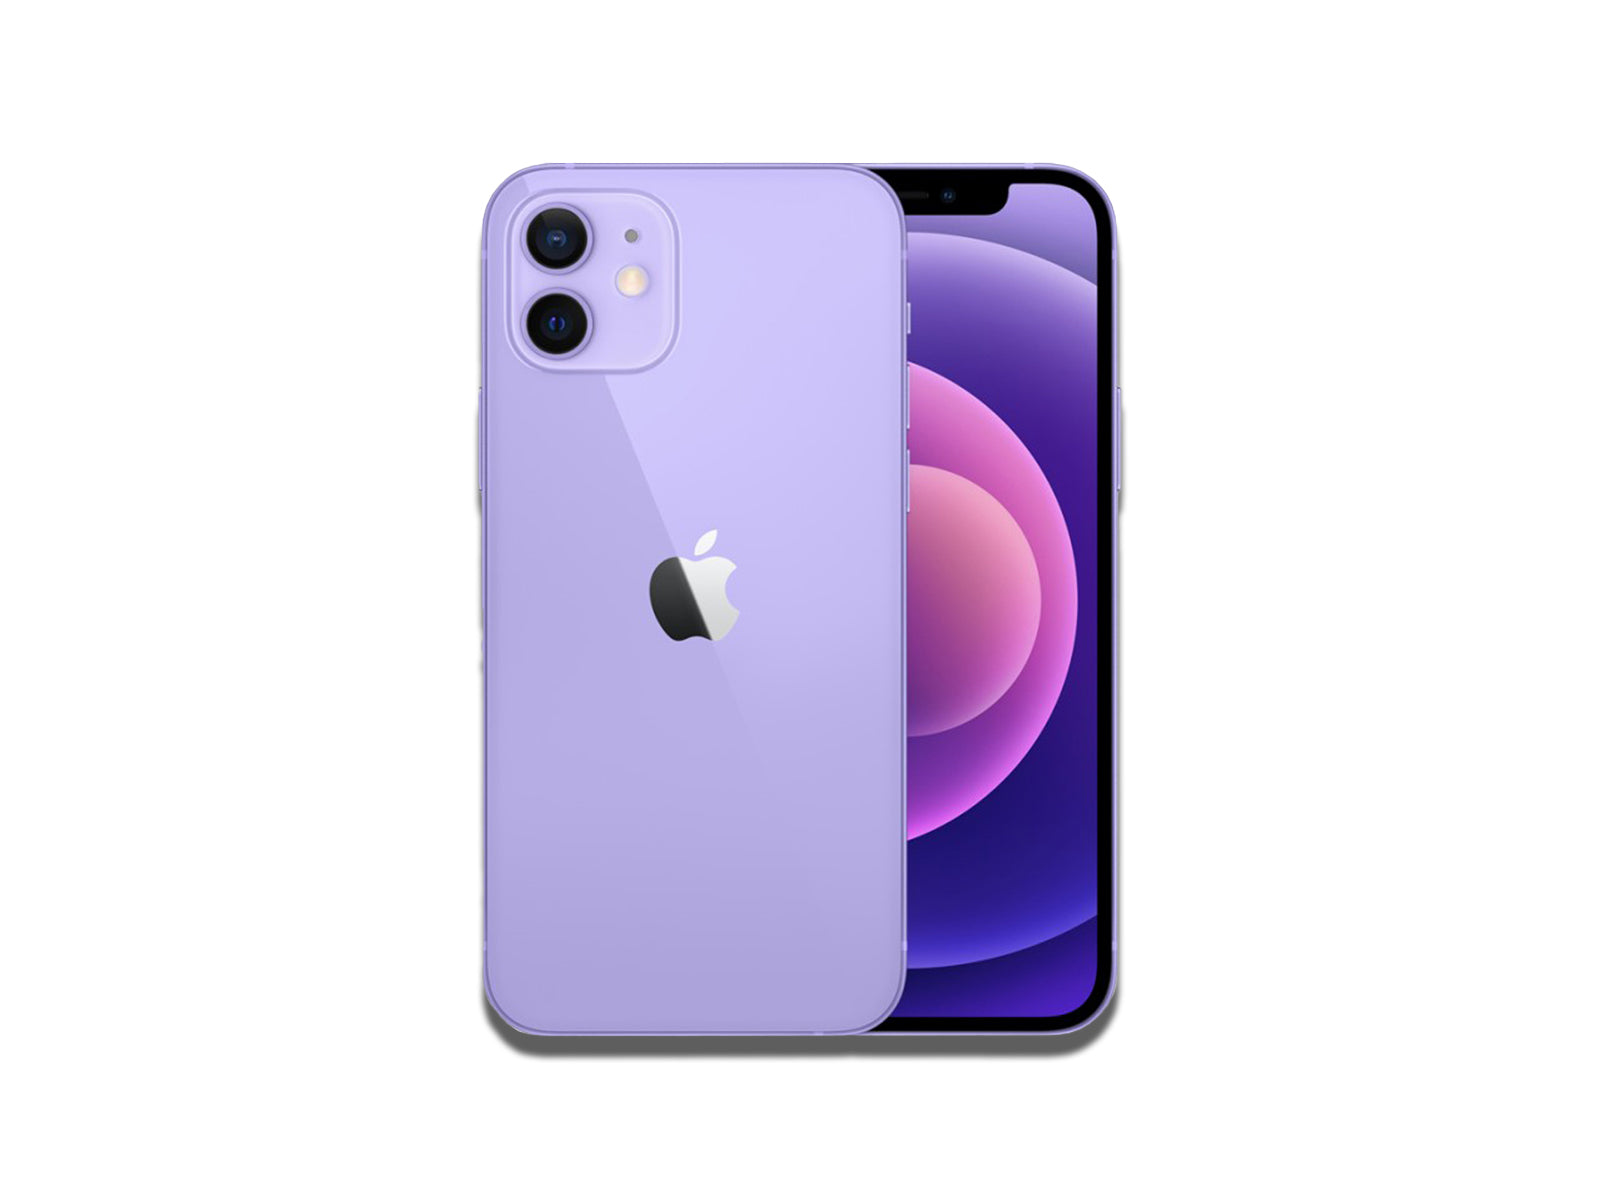 Image of the Apple iPhone 12 Purple on the white background